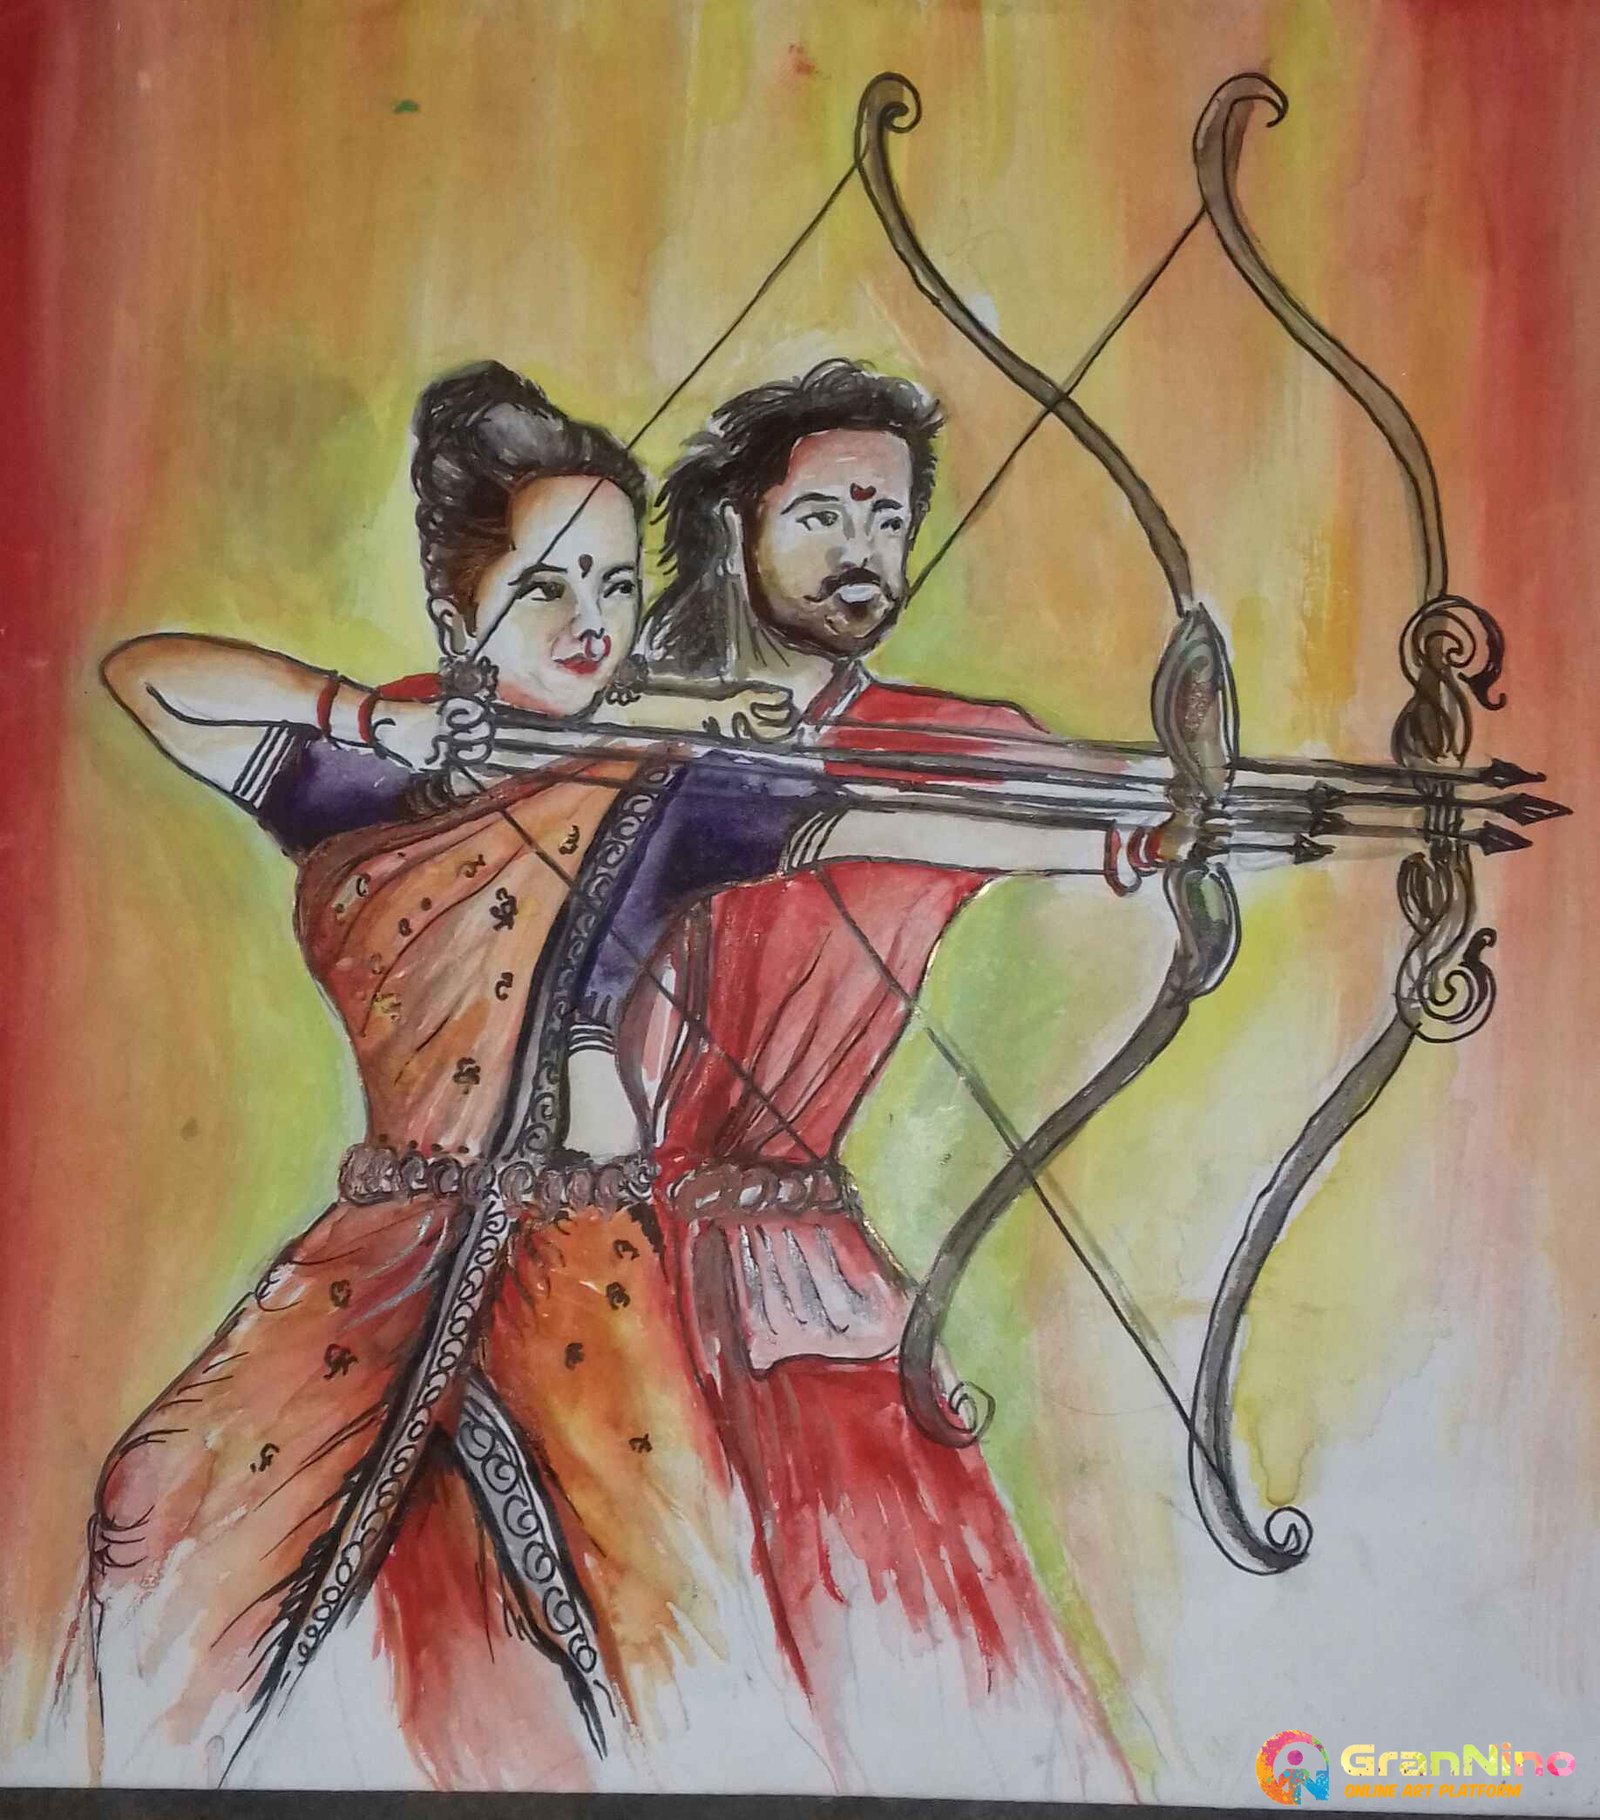 Bahubali 2 drawing | Portrait sketches, Drawing sketches, Drawings